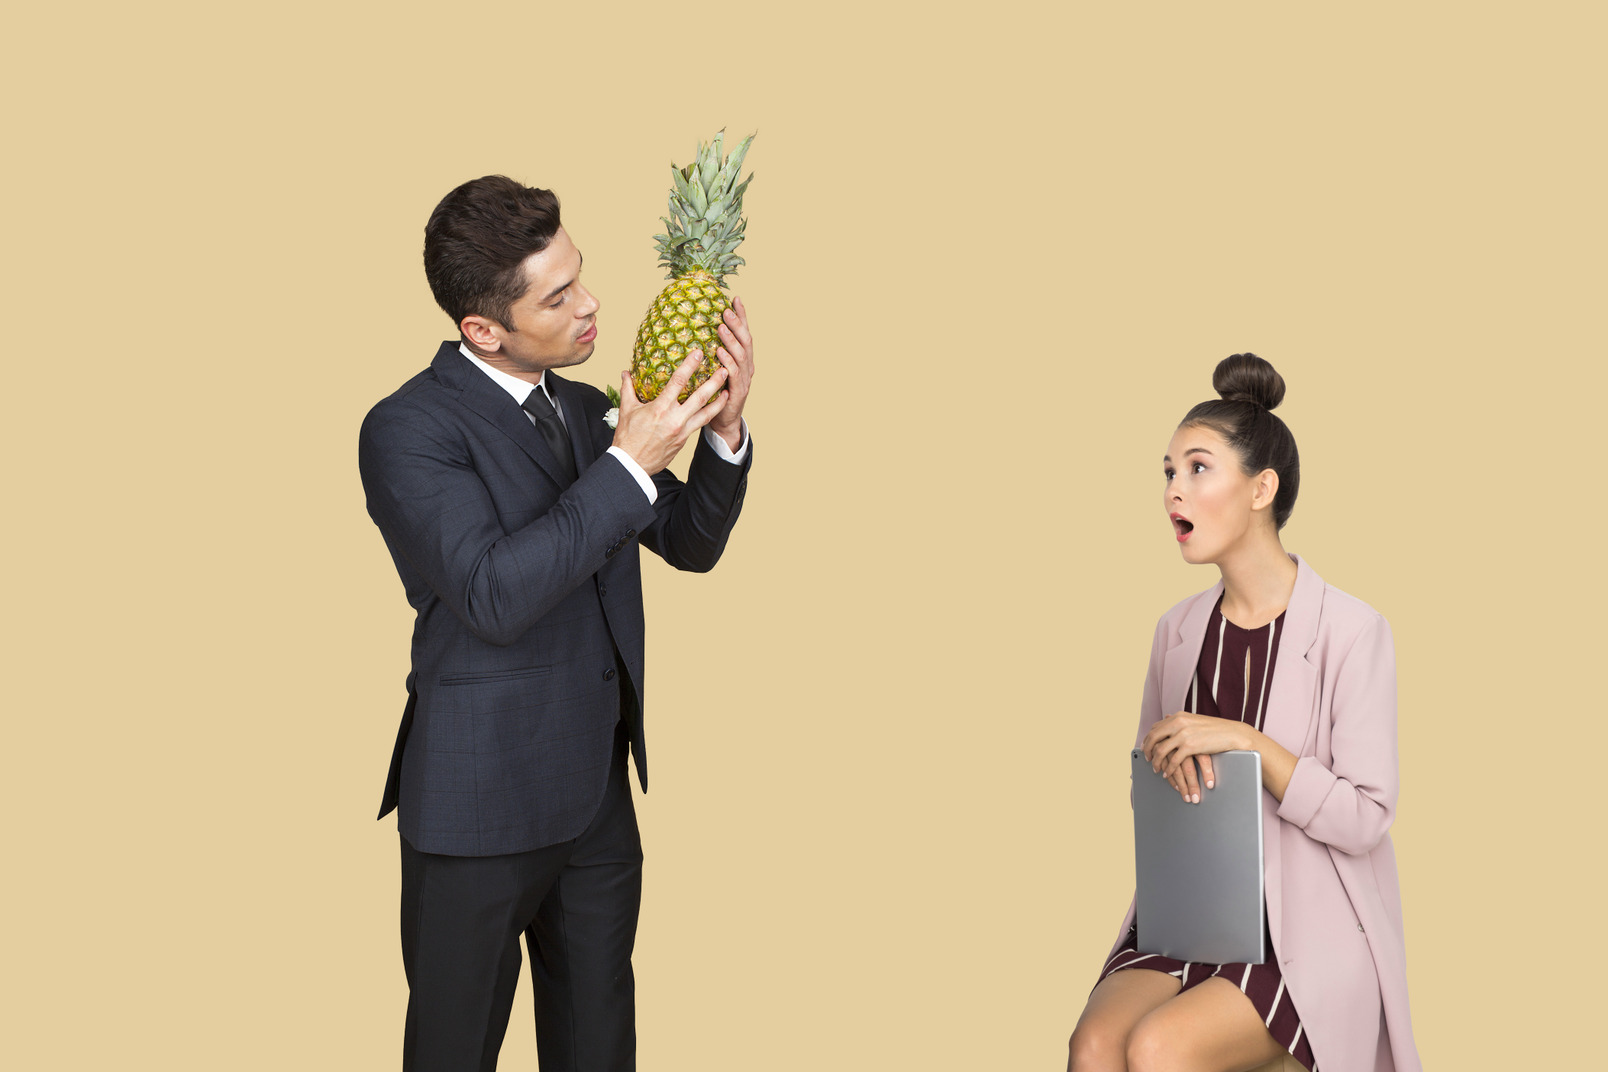 Young girl stunned 'cuase groom is going to kiss a pineapple